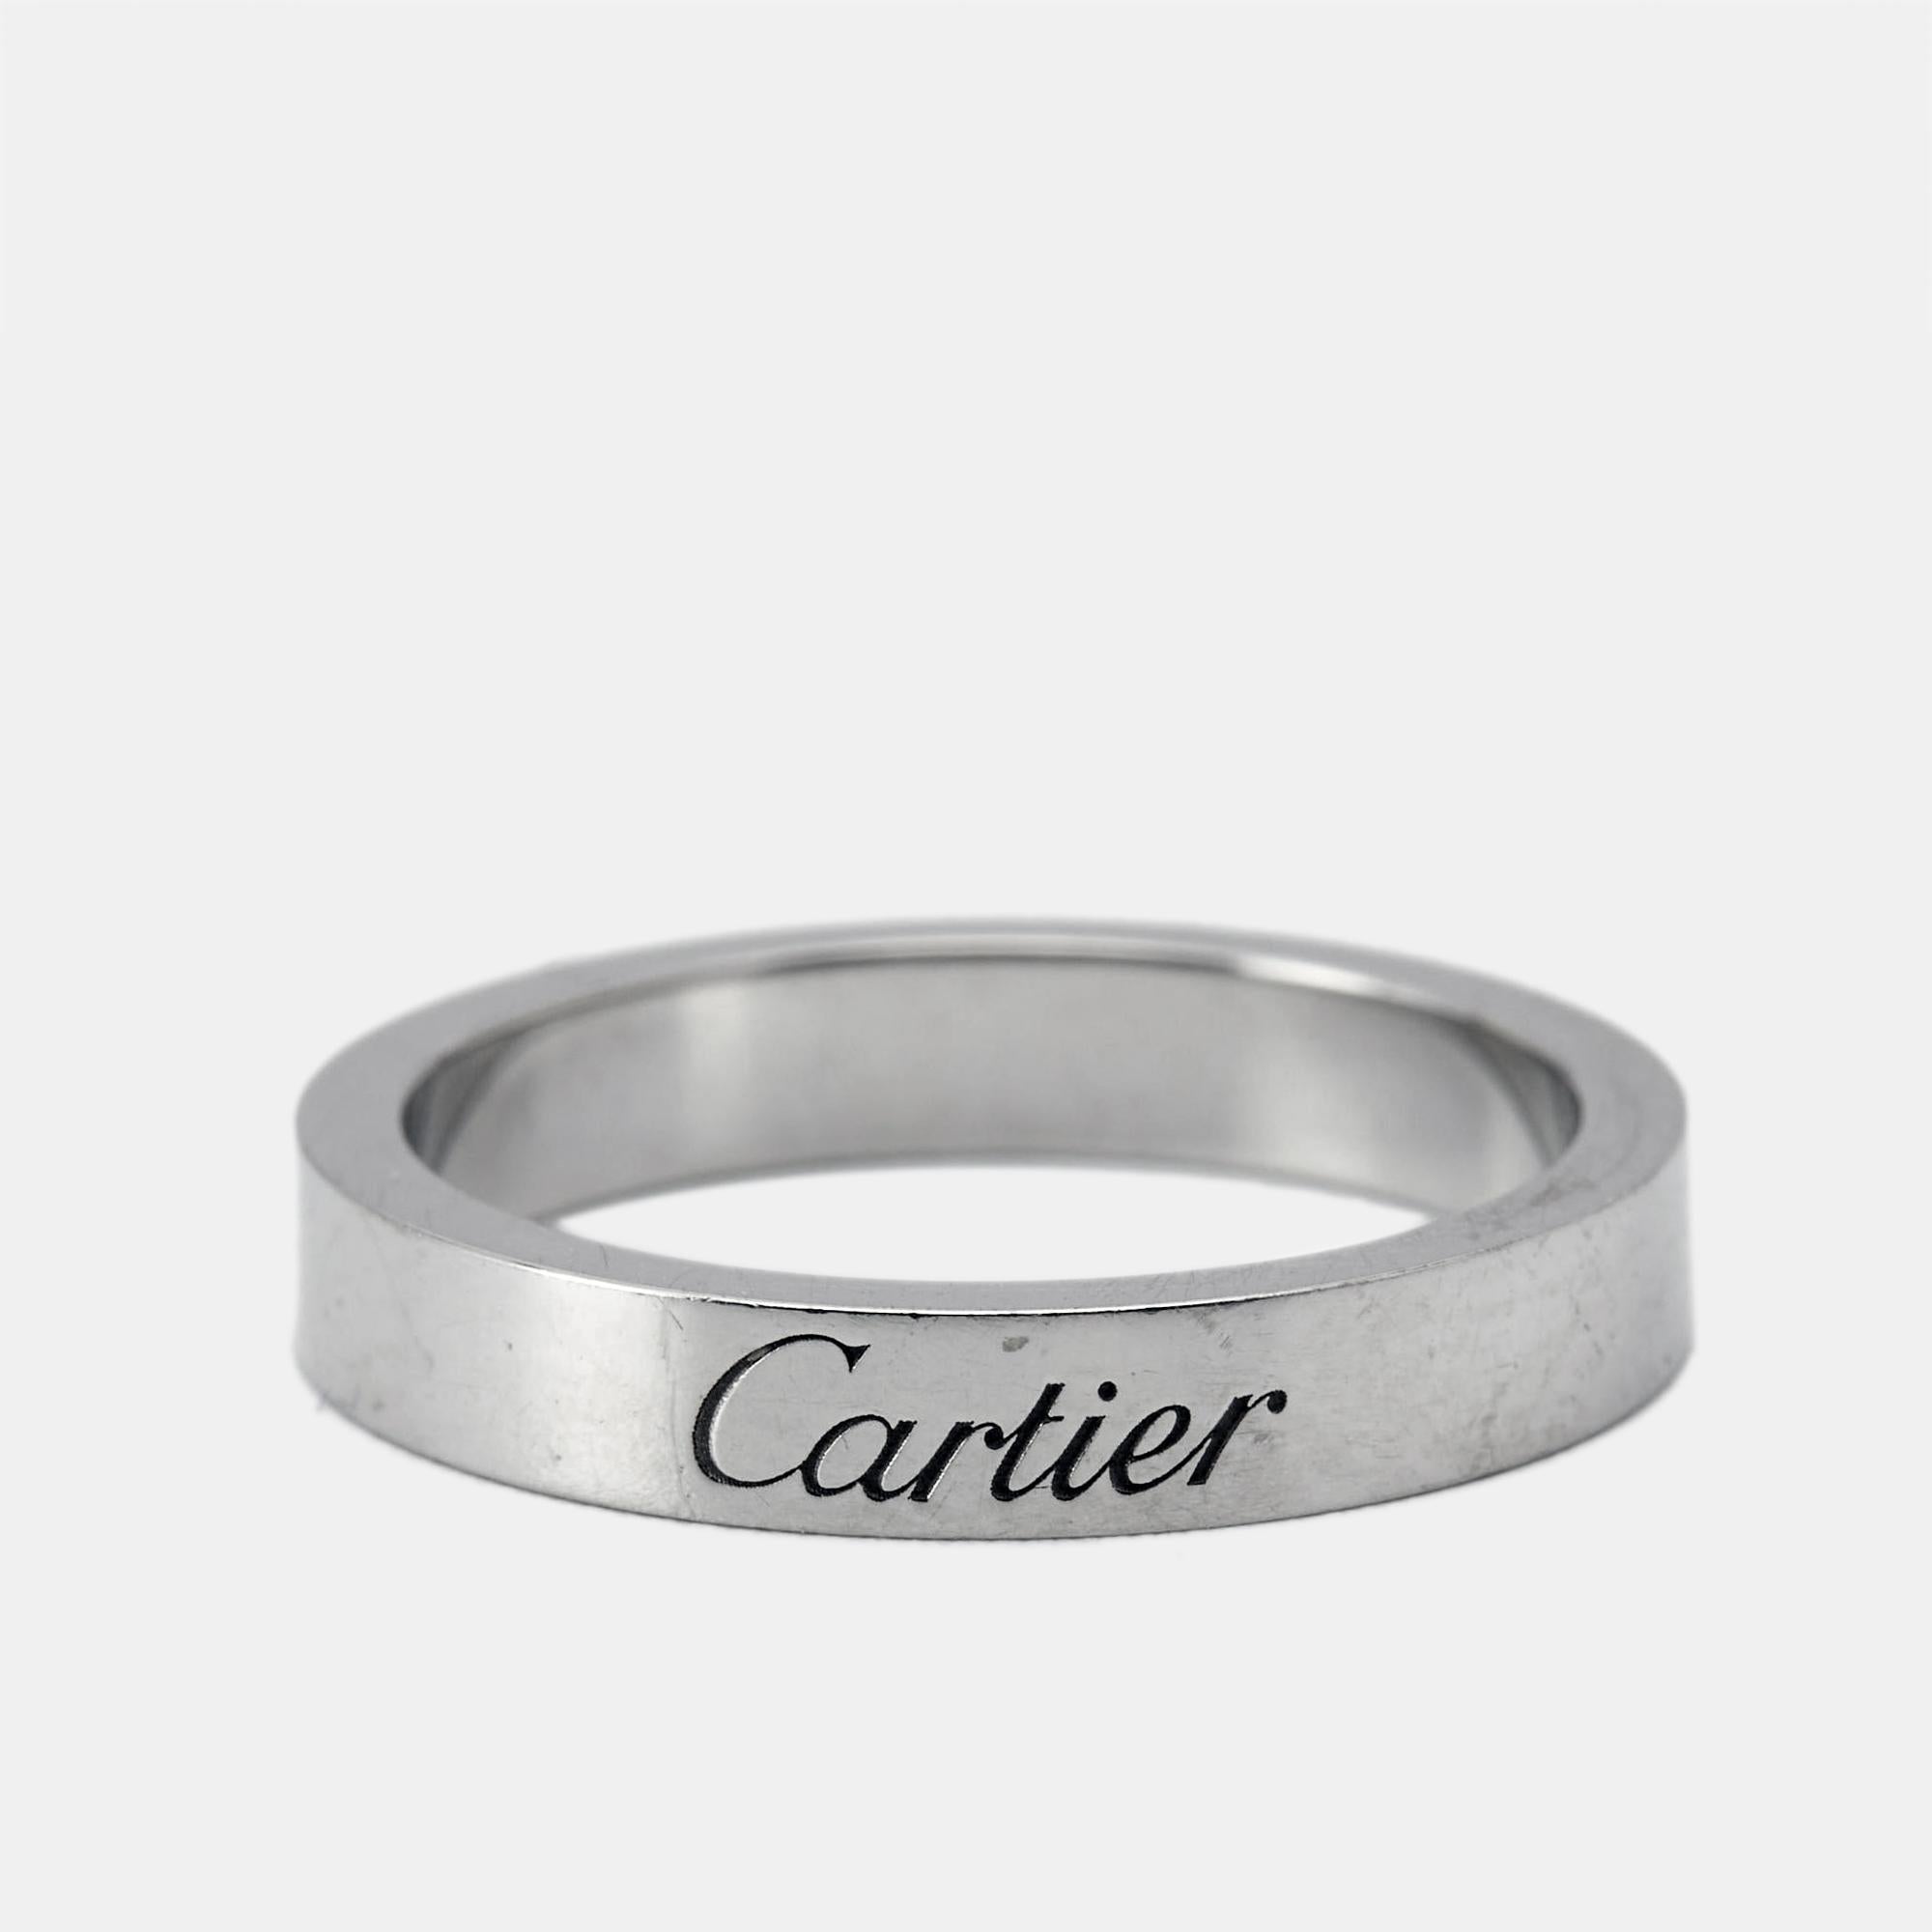 Crafted from luxurious platinum, the C de Cartier wedding band exudes timeless sophistication. Its sleek design features the iconic 